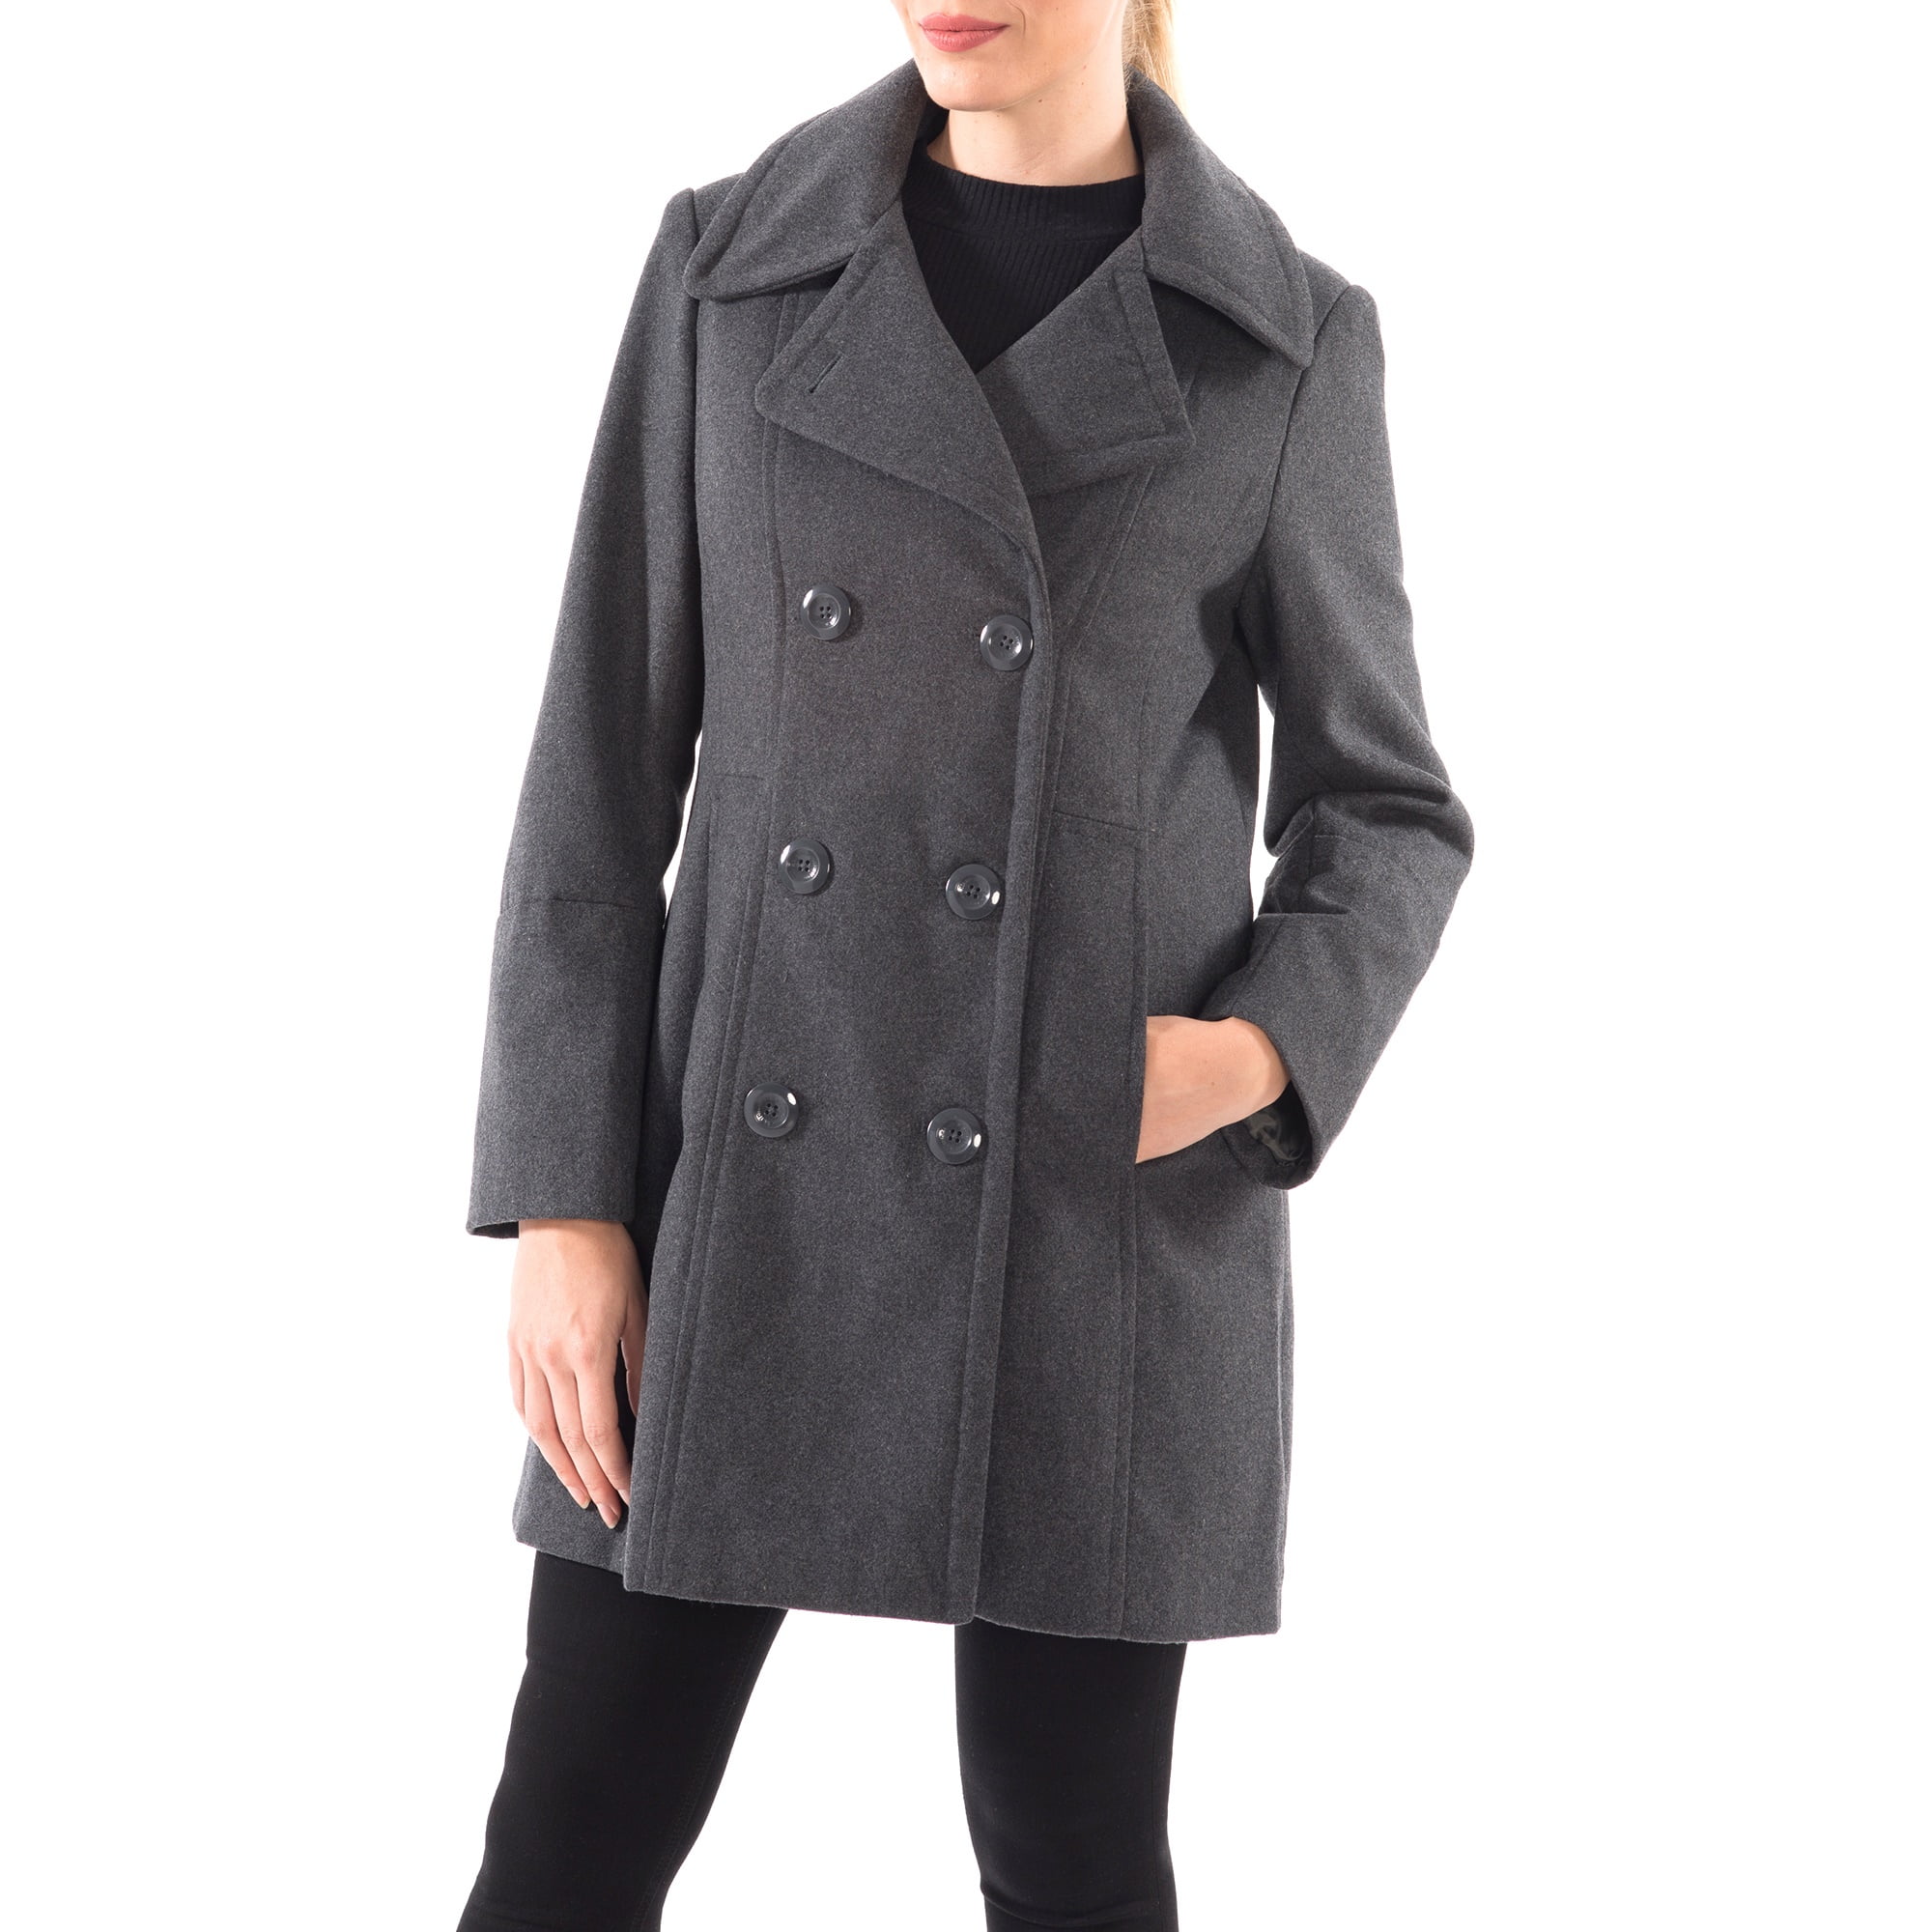 Hunter Boot Wool Double Breaster Peacoat Red NWT $465 